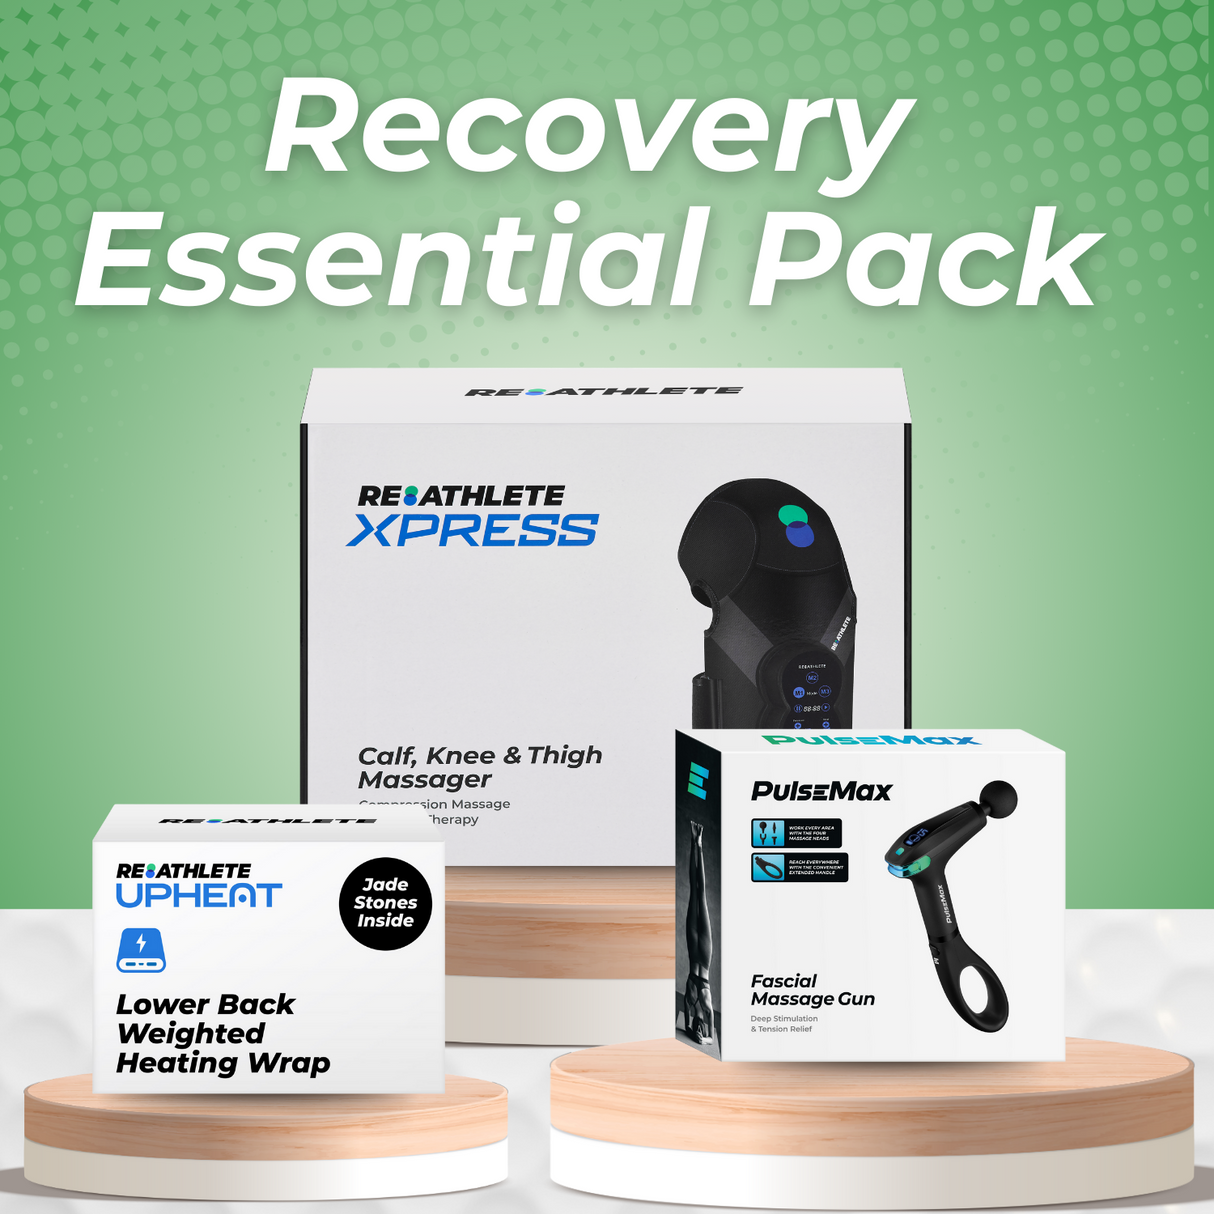 ReAthlete Recovery Essentials Pack Massagers